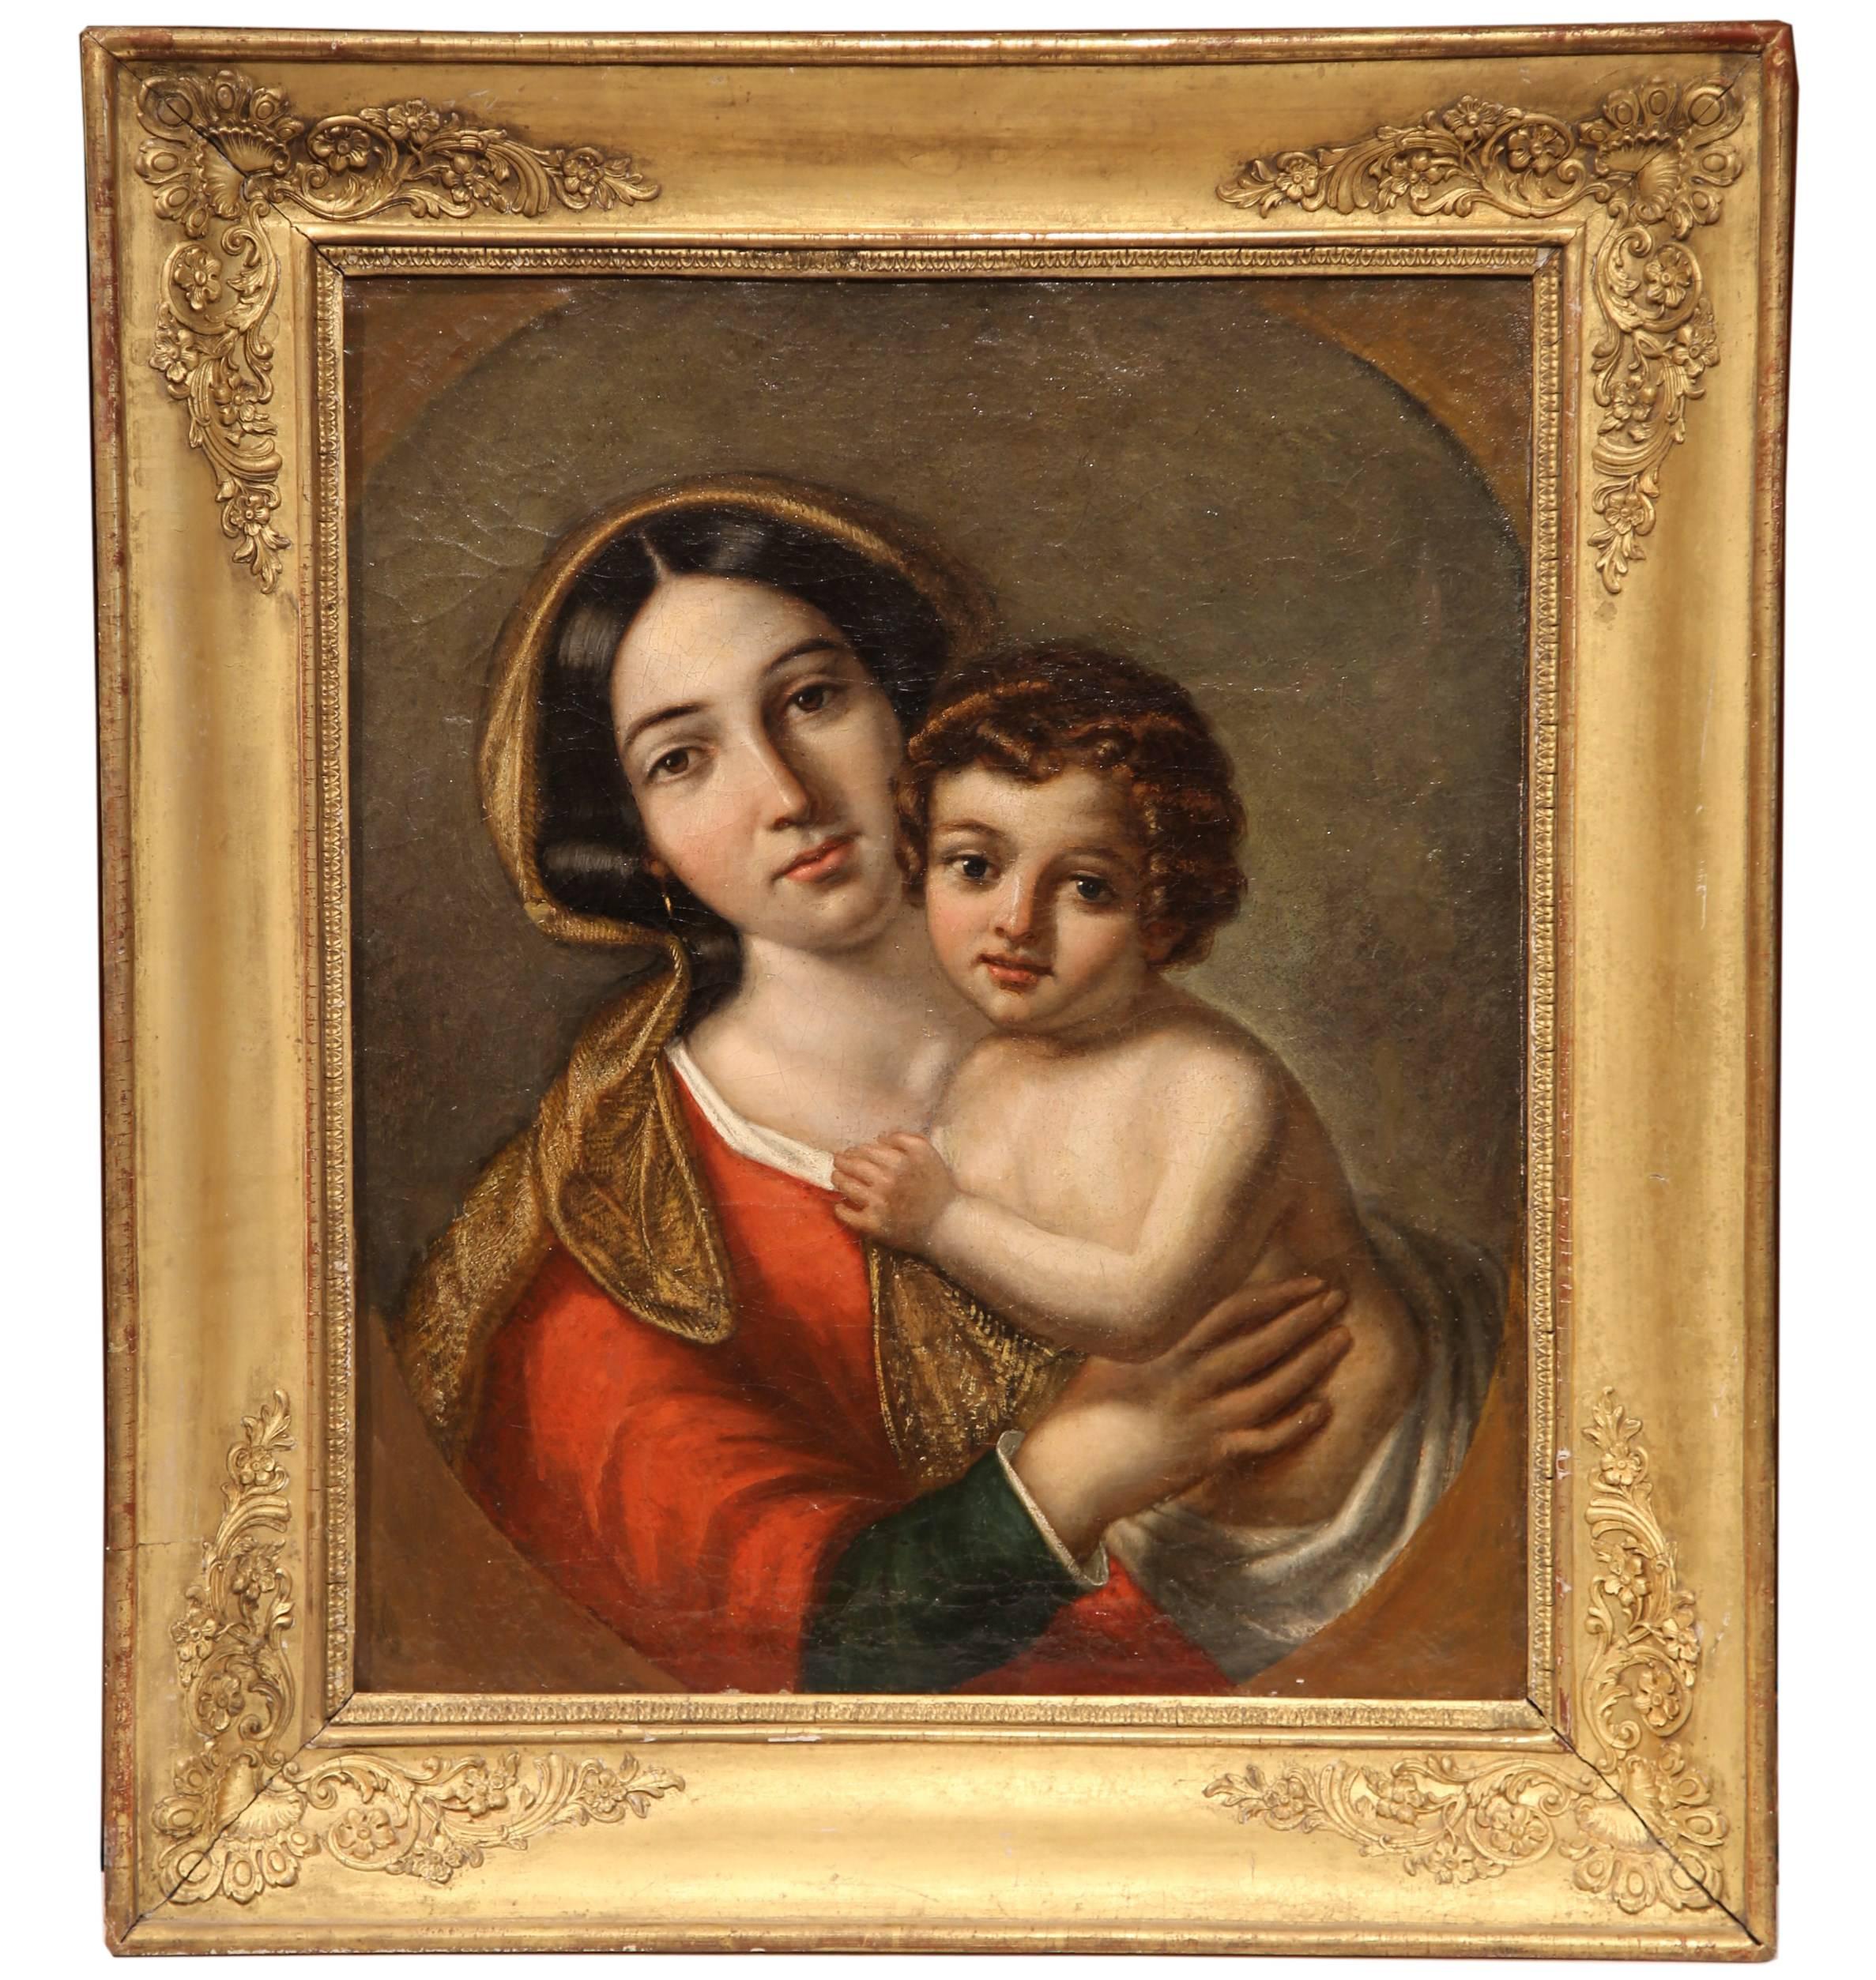 Unknown Figurative Painting - Mid-18th Century French Framed Oil on Canvas "Vierge a l'Enfant" Painting